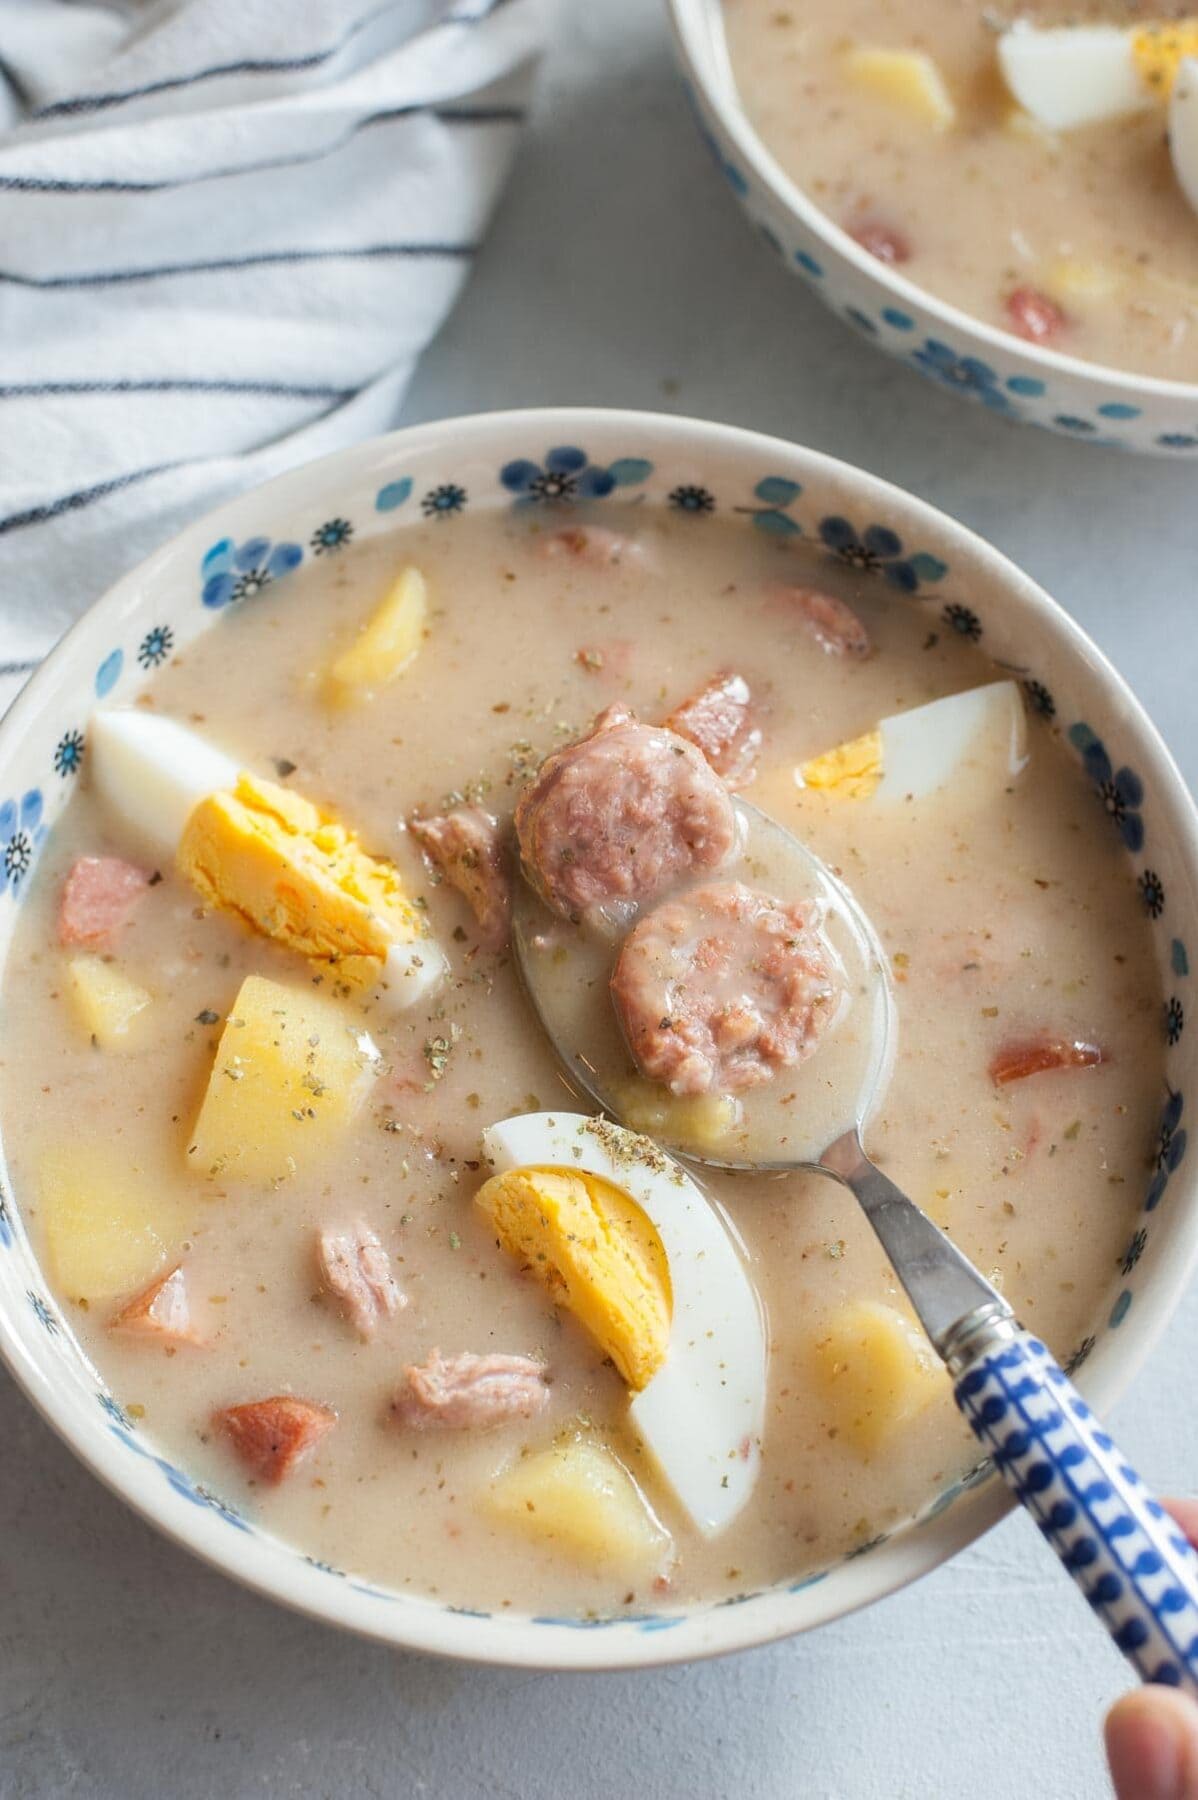 Zurek soup in a white bowl served with potatoes and eggs.